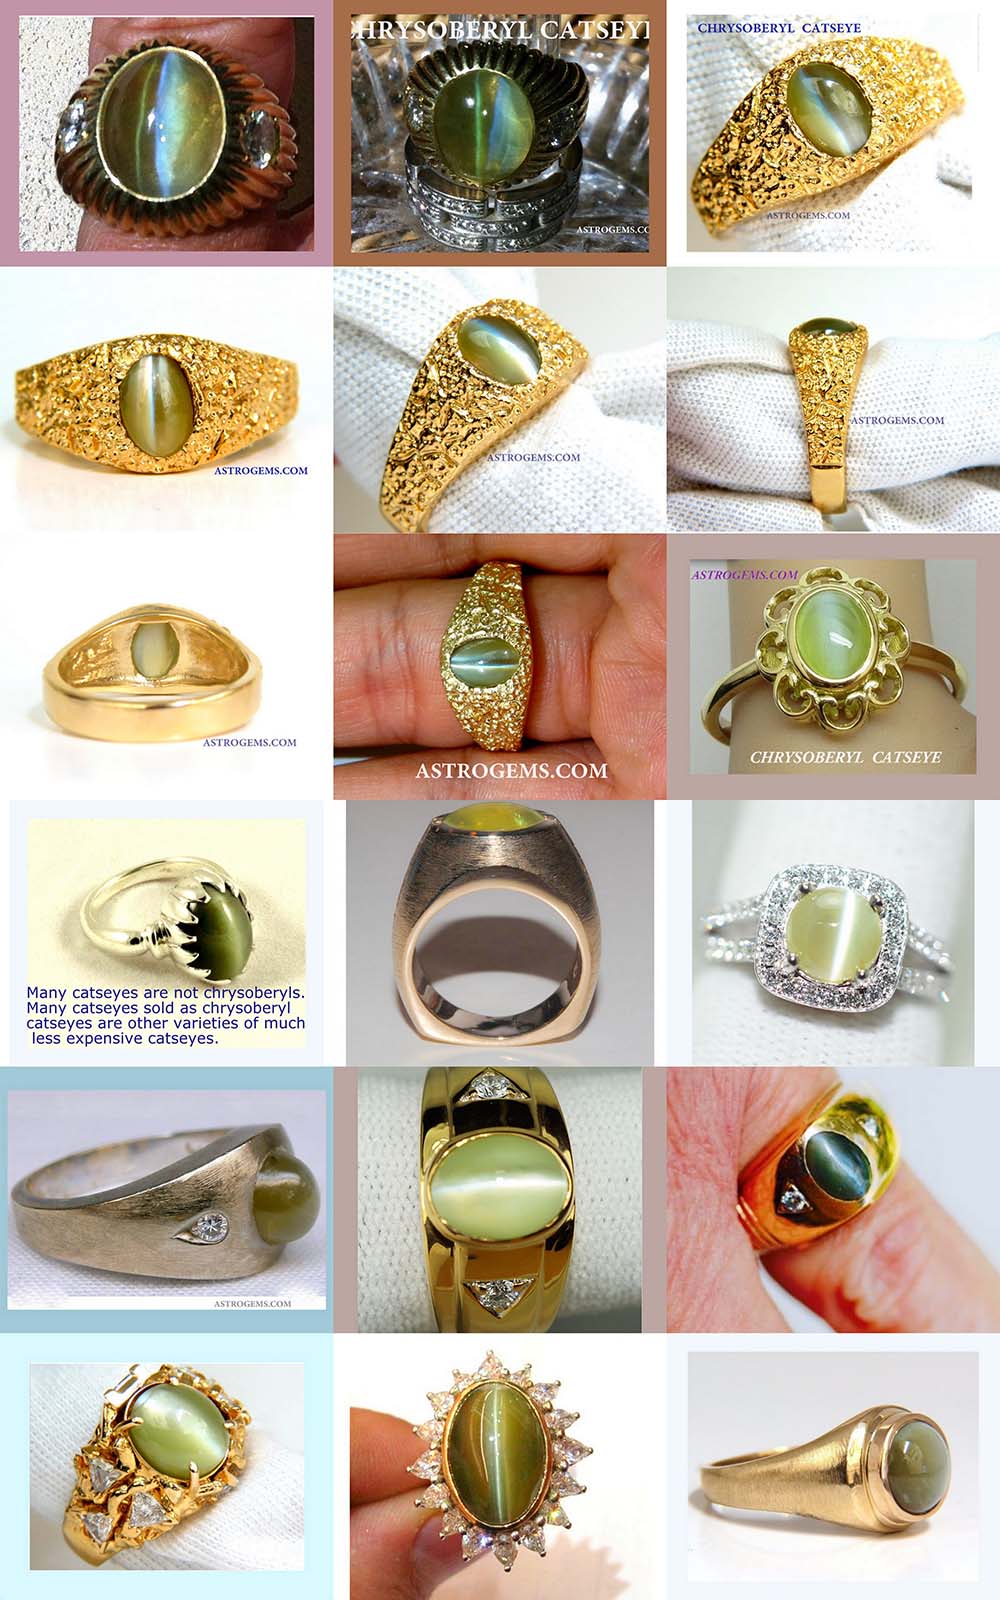 Astrogems can make astrological Chrysoberyl Catseye rings in any style.